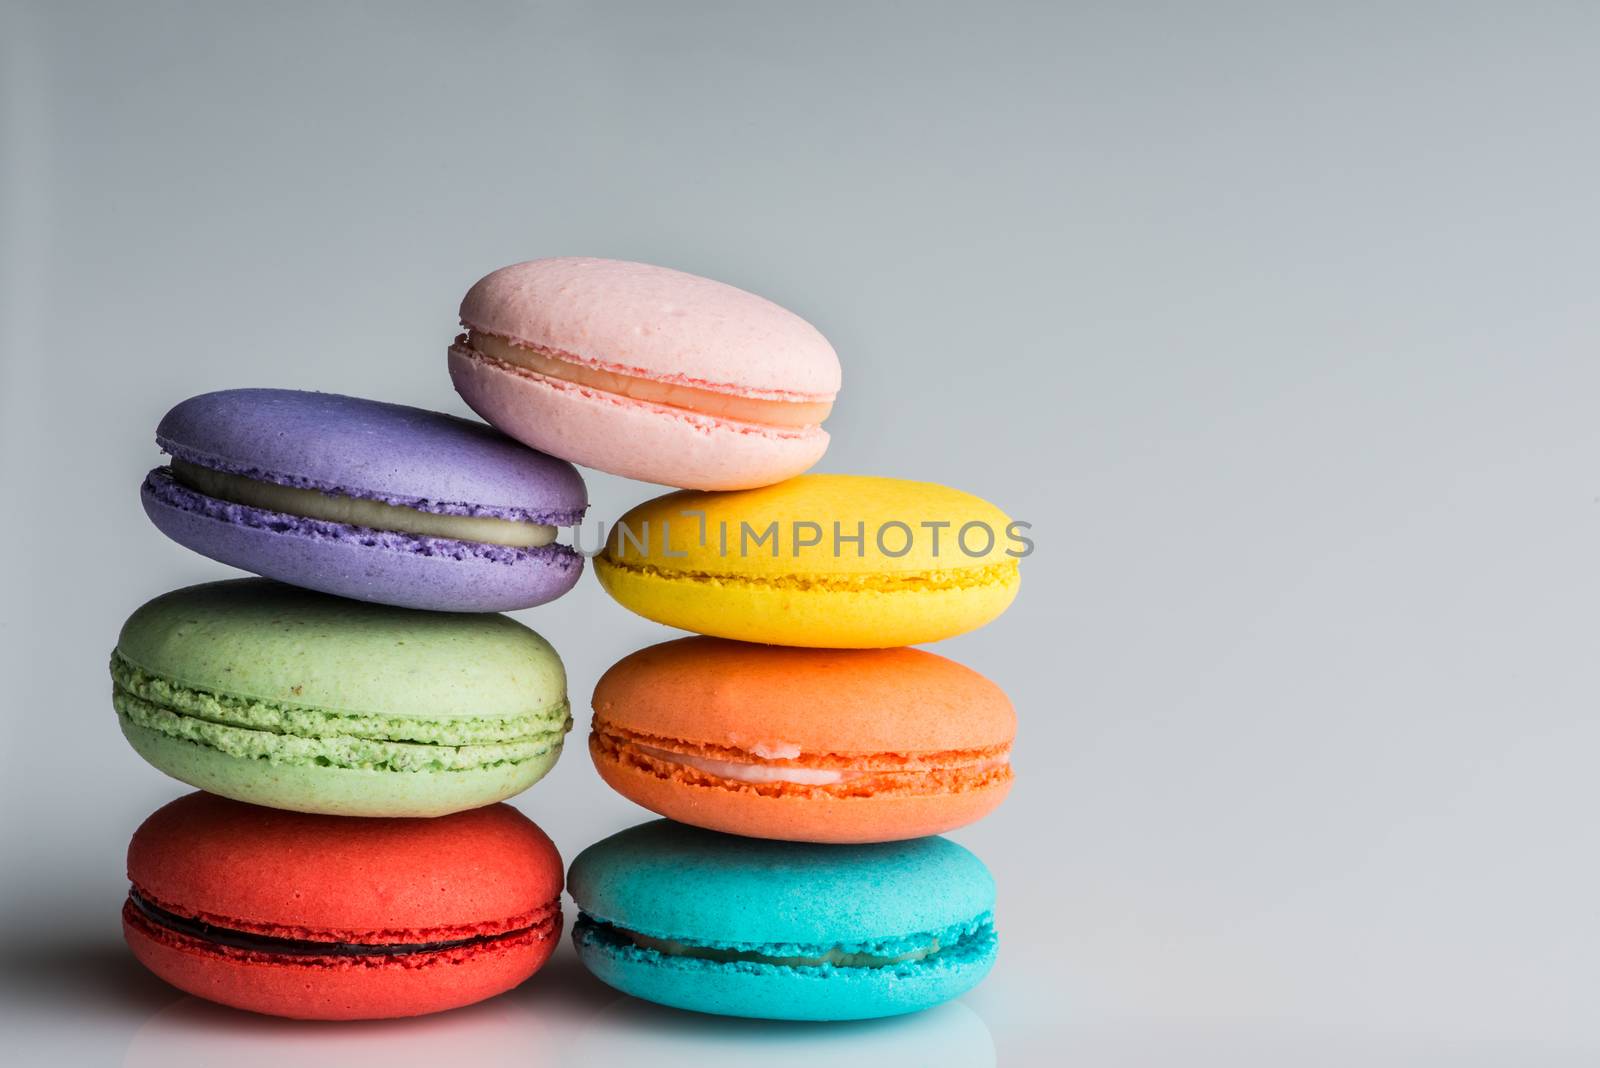 Stacked macaroons by gregory21